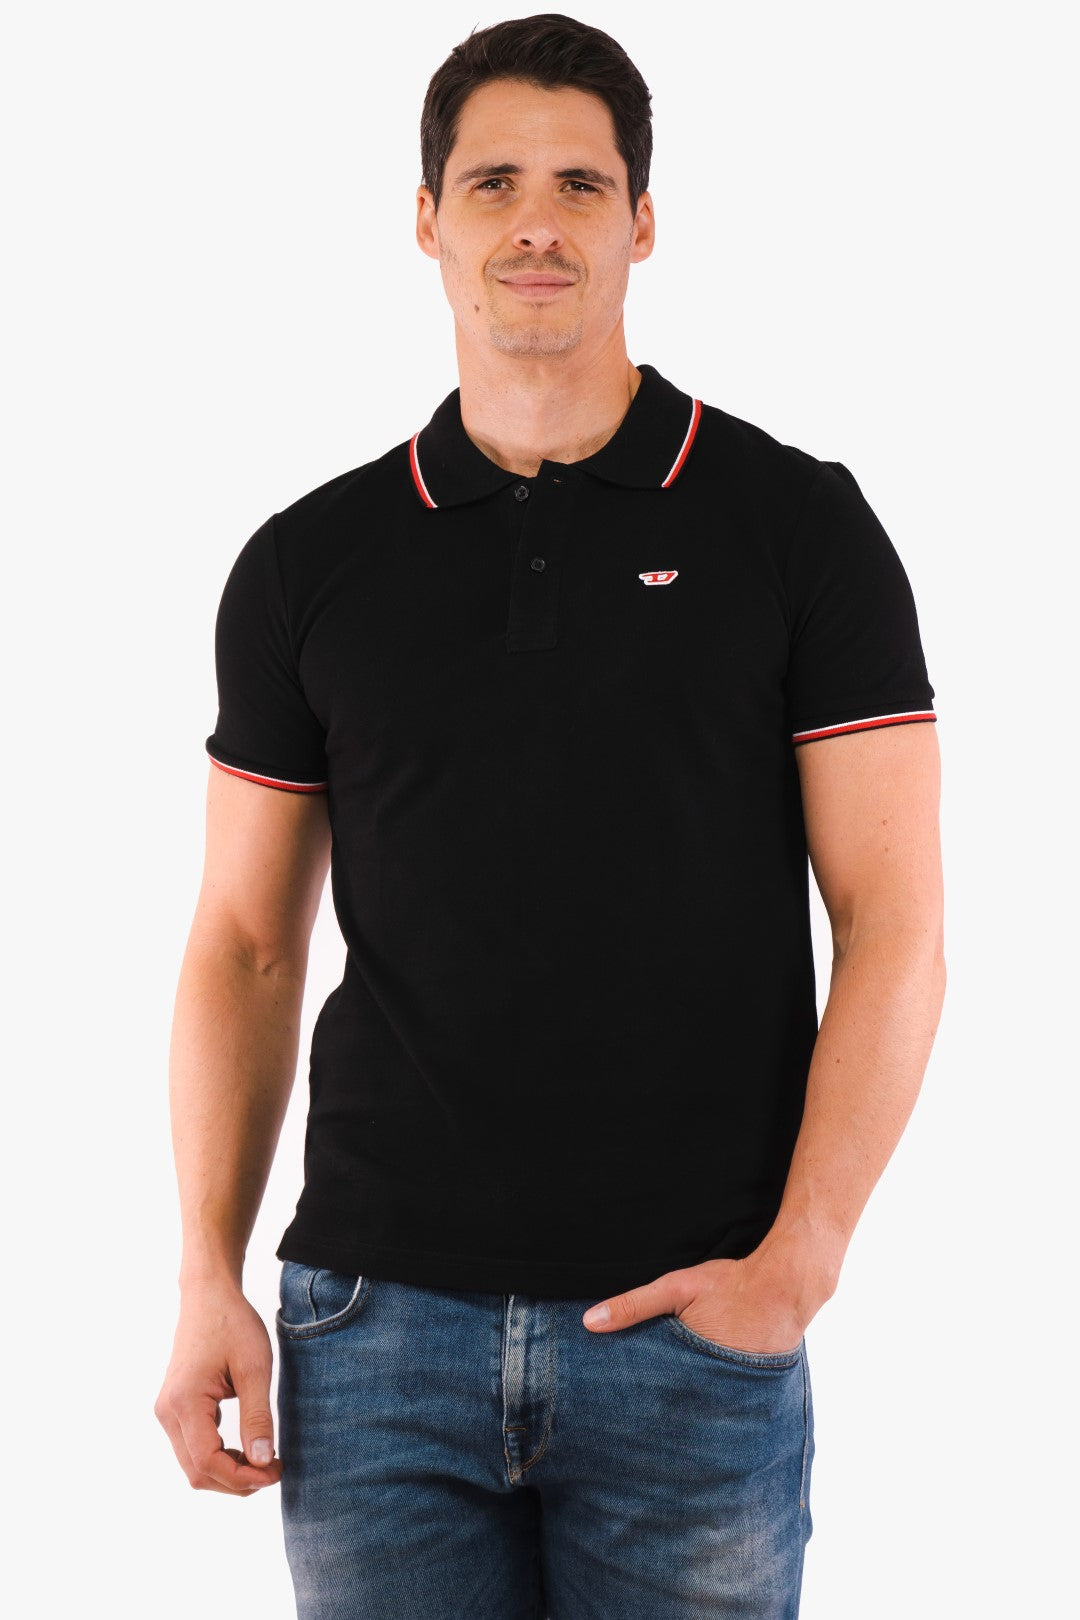 Diesel Short Sleeve Polo Shirt in Black color